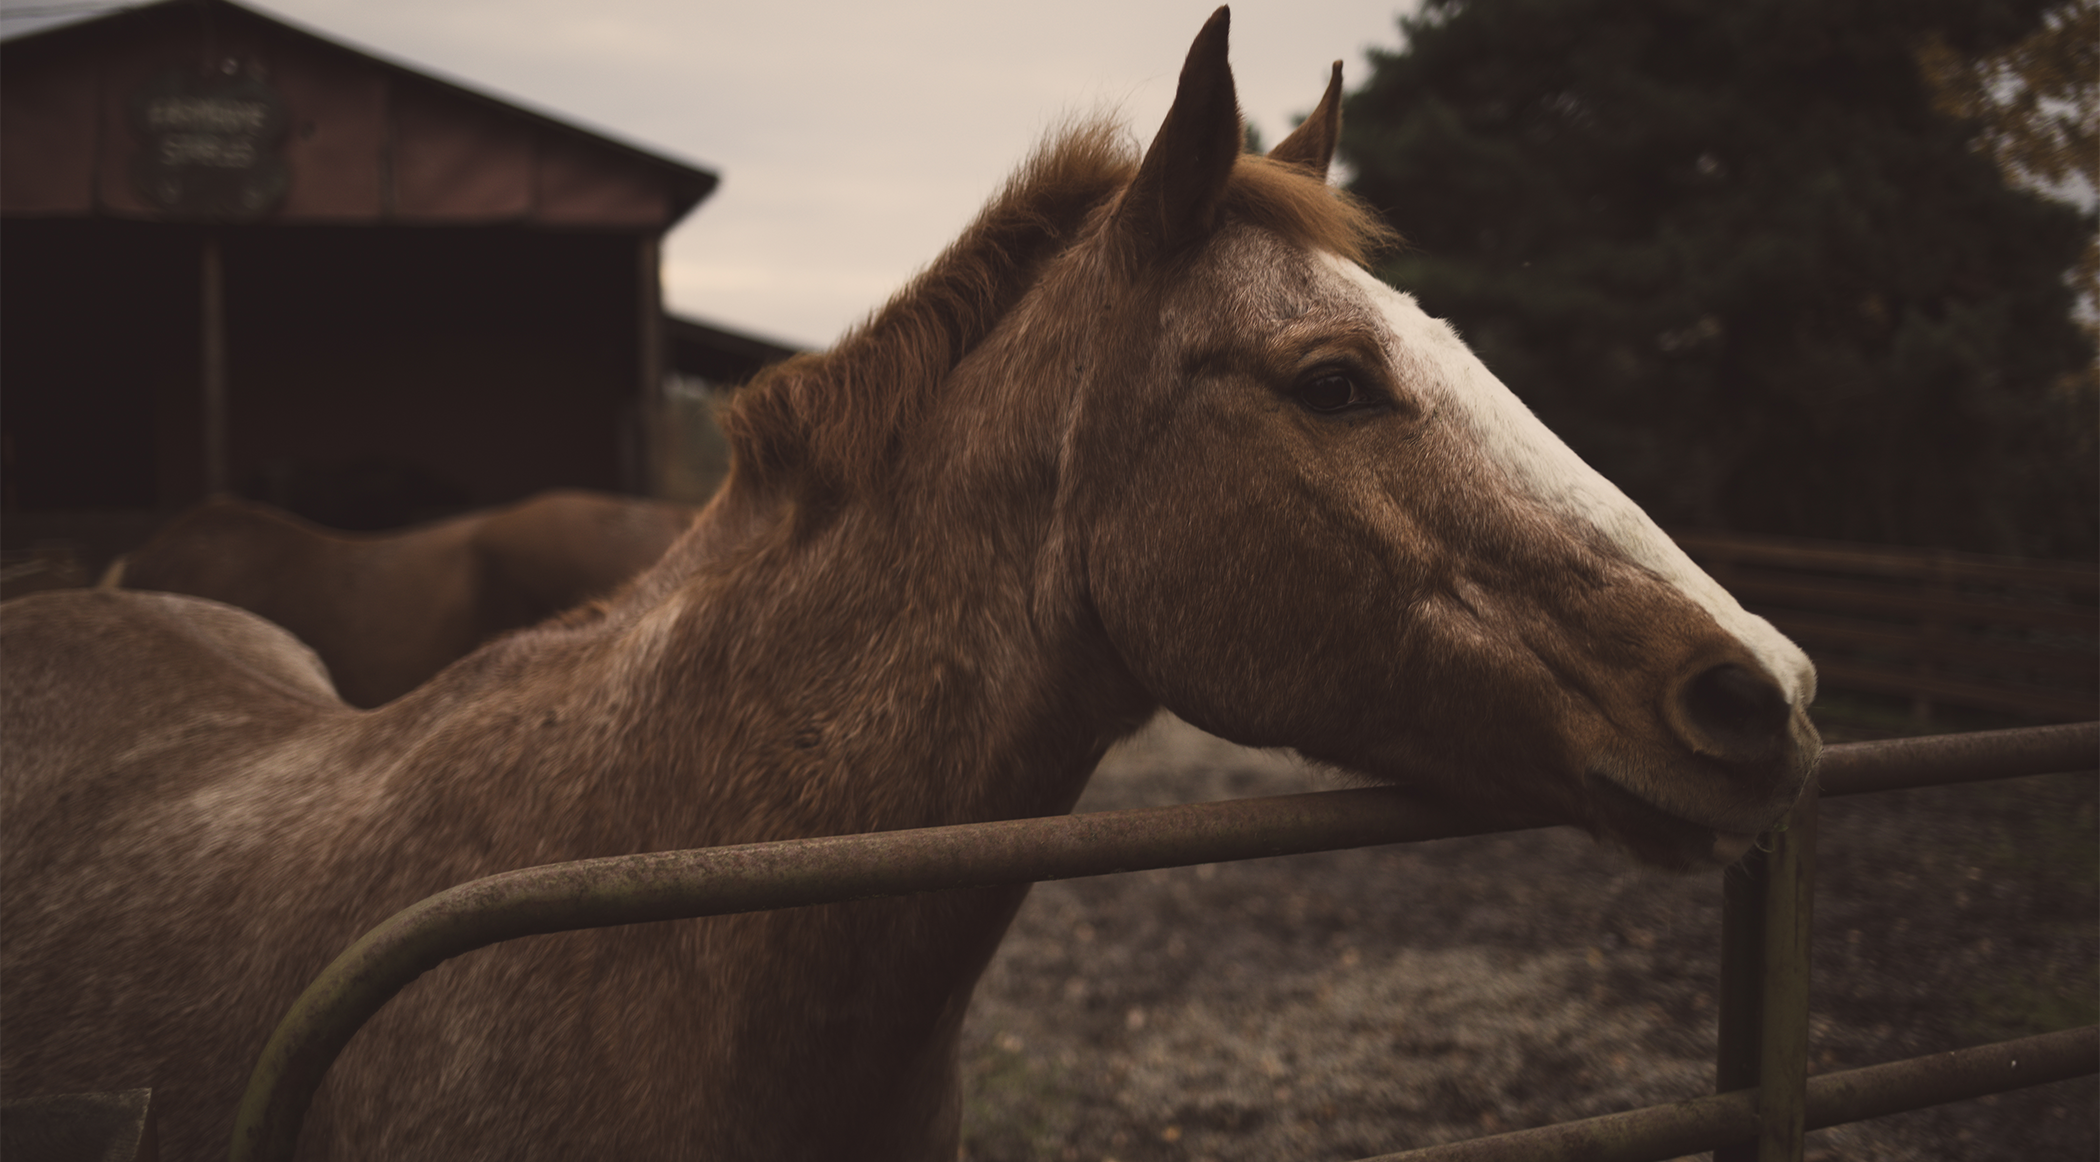 Photo of the Day: Equine Therapy [Photography]